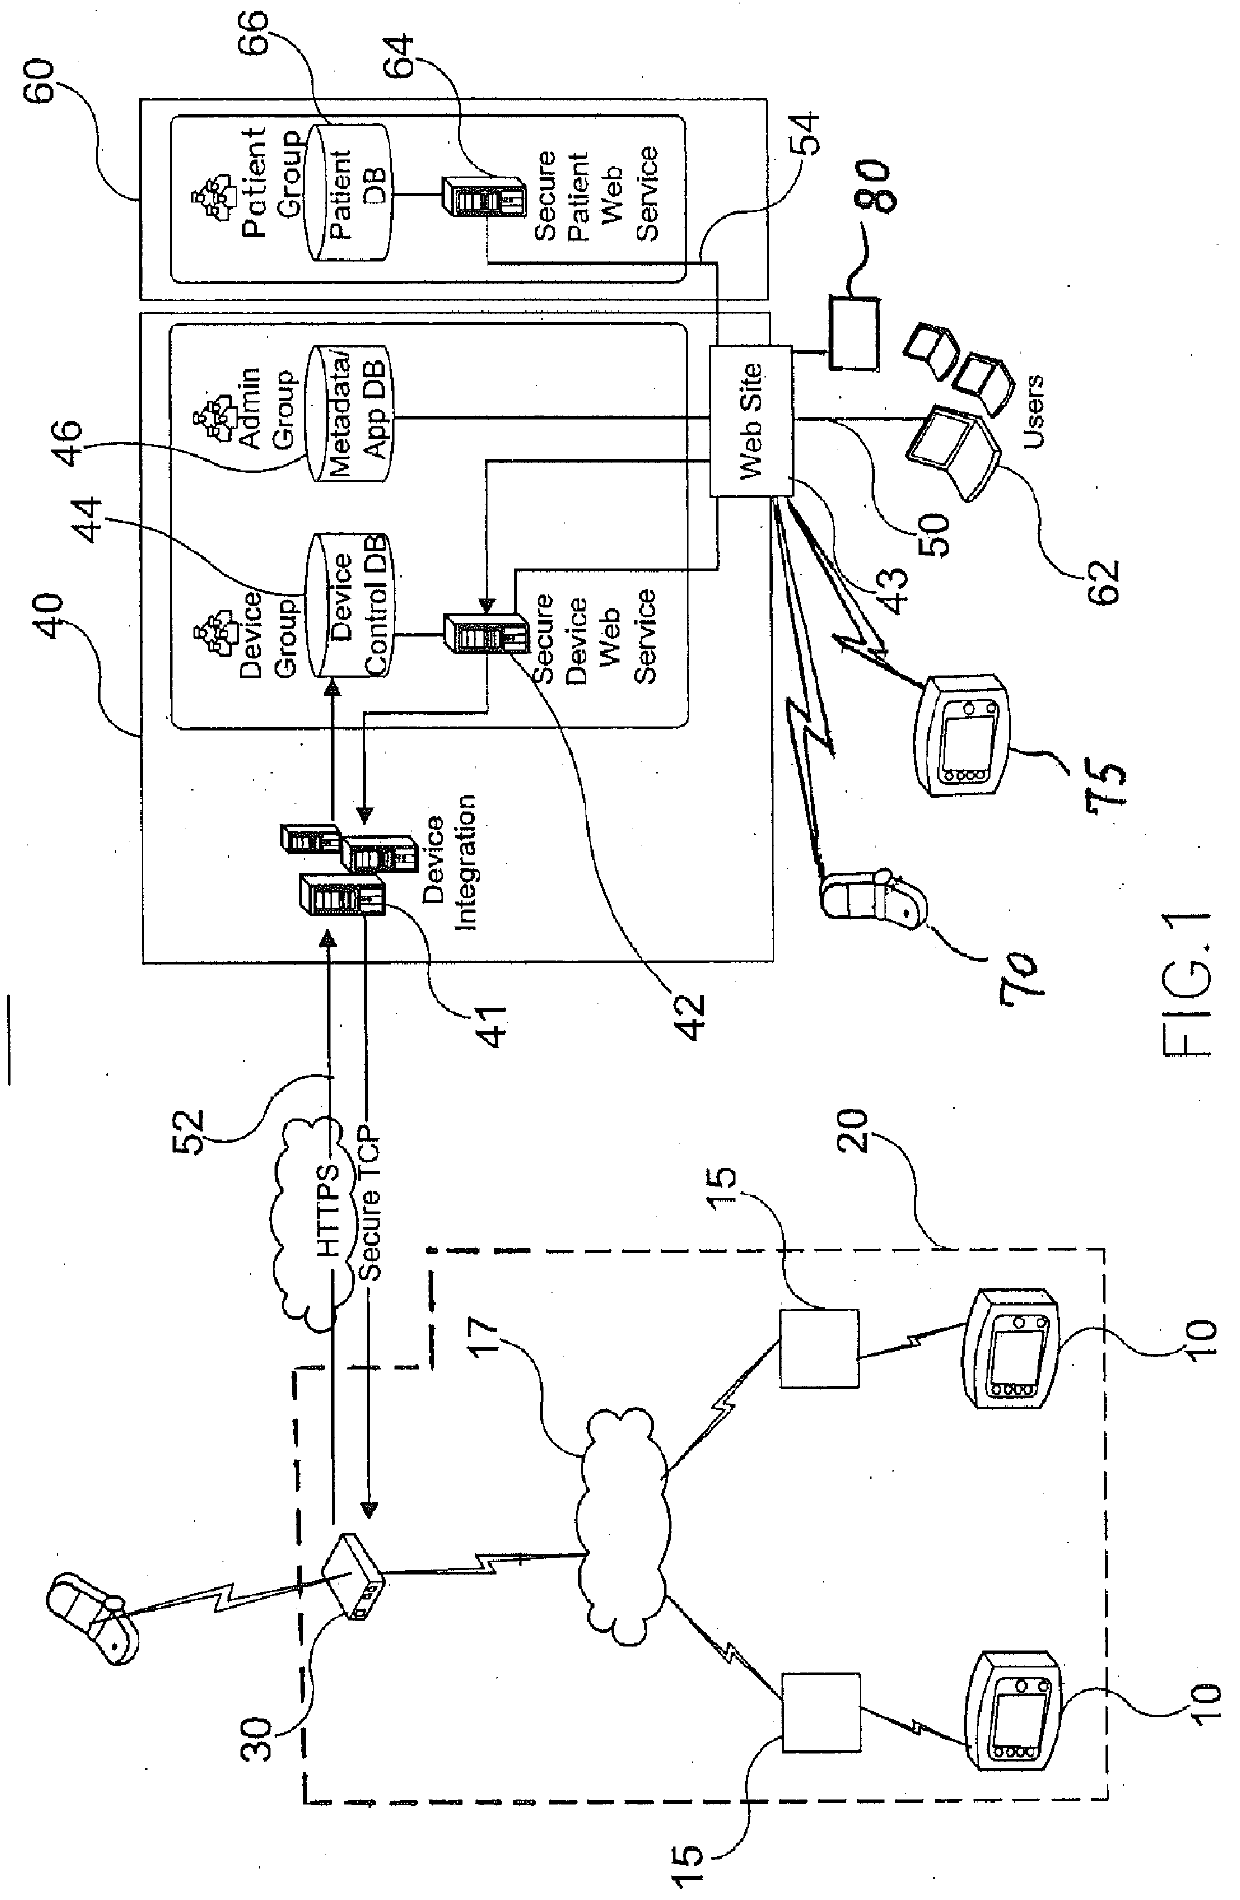 Remote Monitoring Systems And Methods For Medical Devices